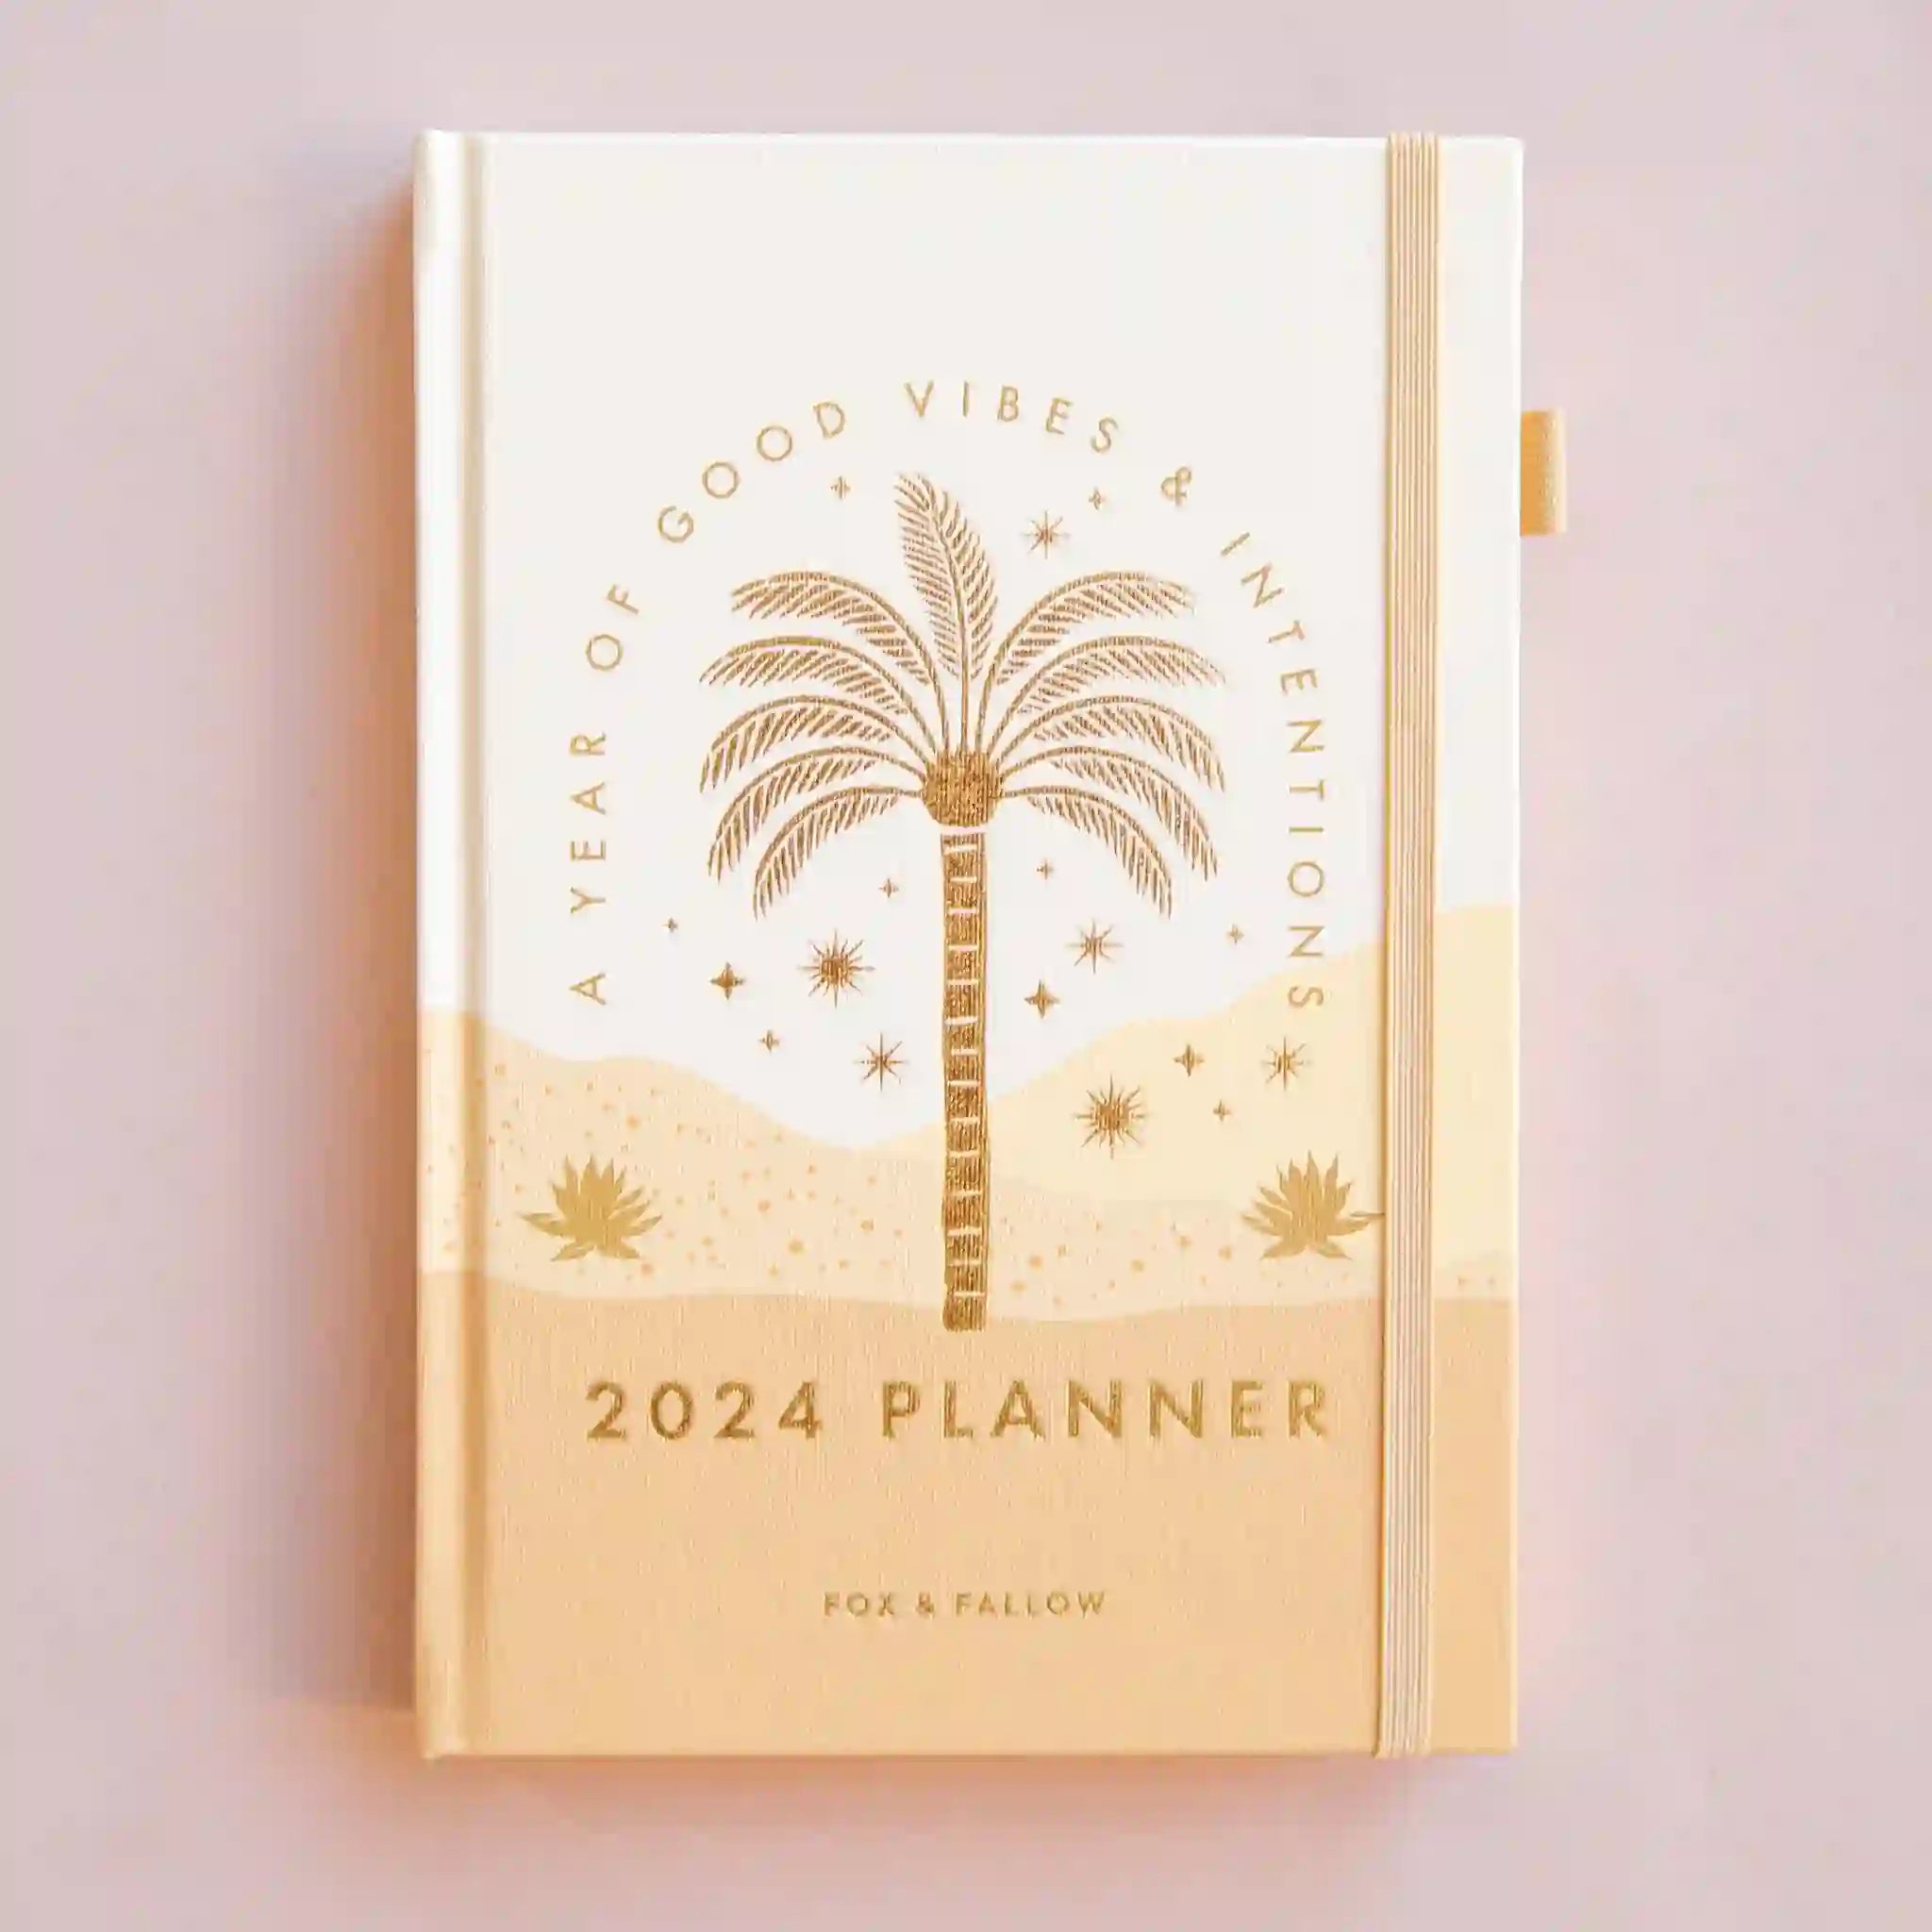 On a pink background is a tan planner with gold foiled &quot;2024 Planner&quot; text in the center as well as arched text over a palm tree design that reads, &quot;A Year Of Good Vibes &amp; Intentions&quot; and a light pink elastic loop for keeping shut.